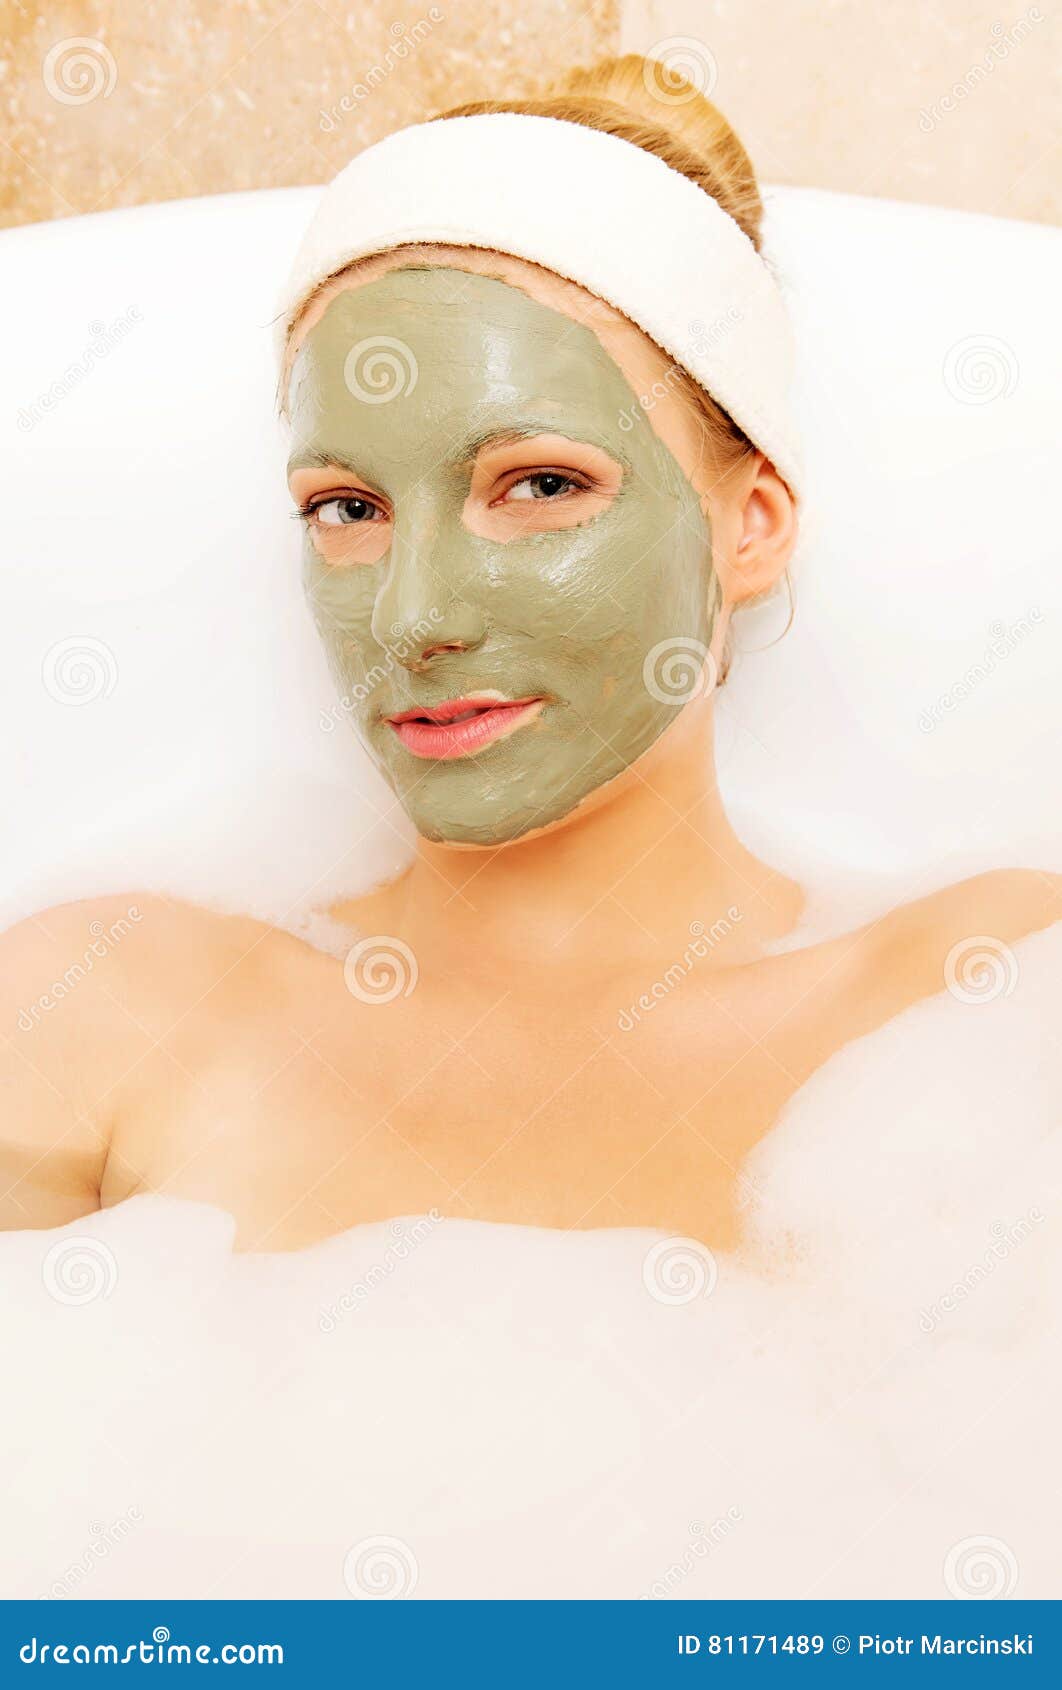 woman with facial mud mask. dayspa